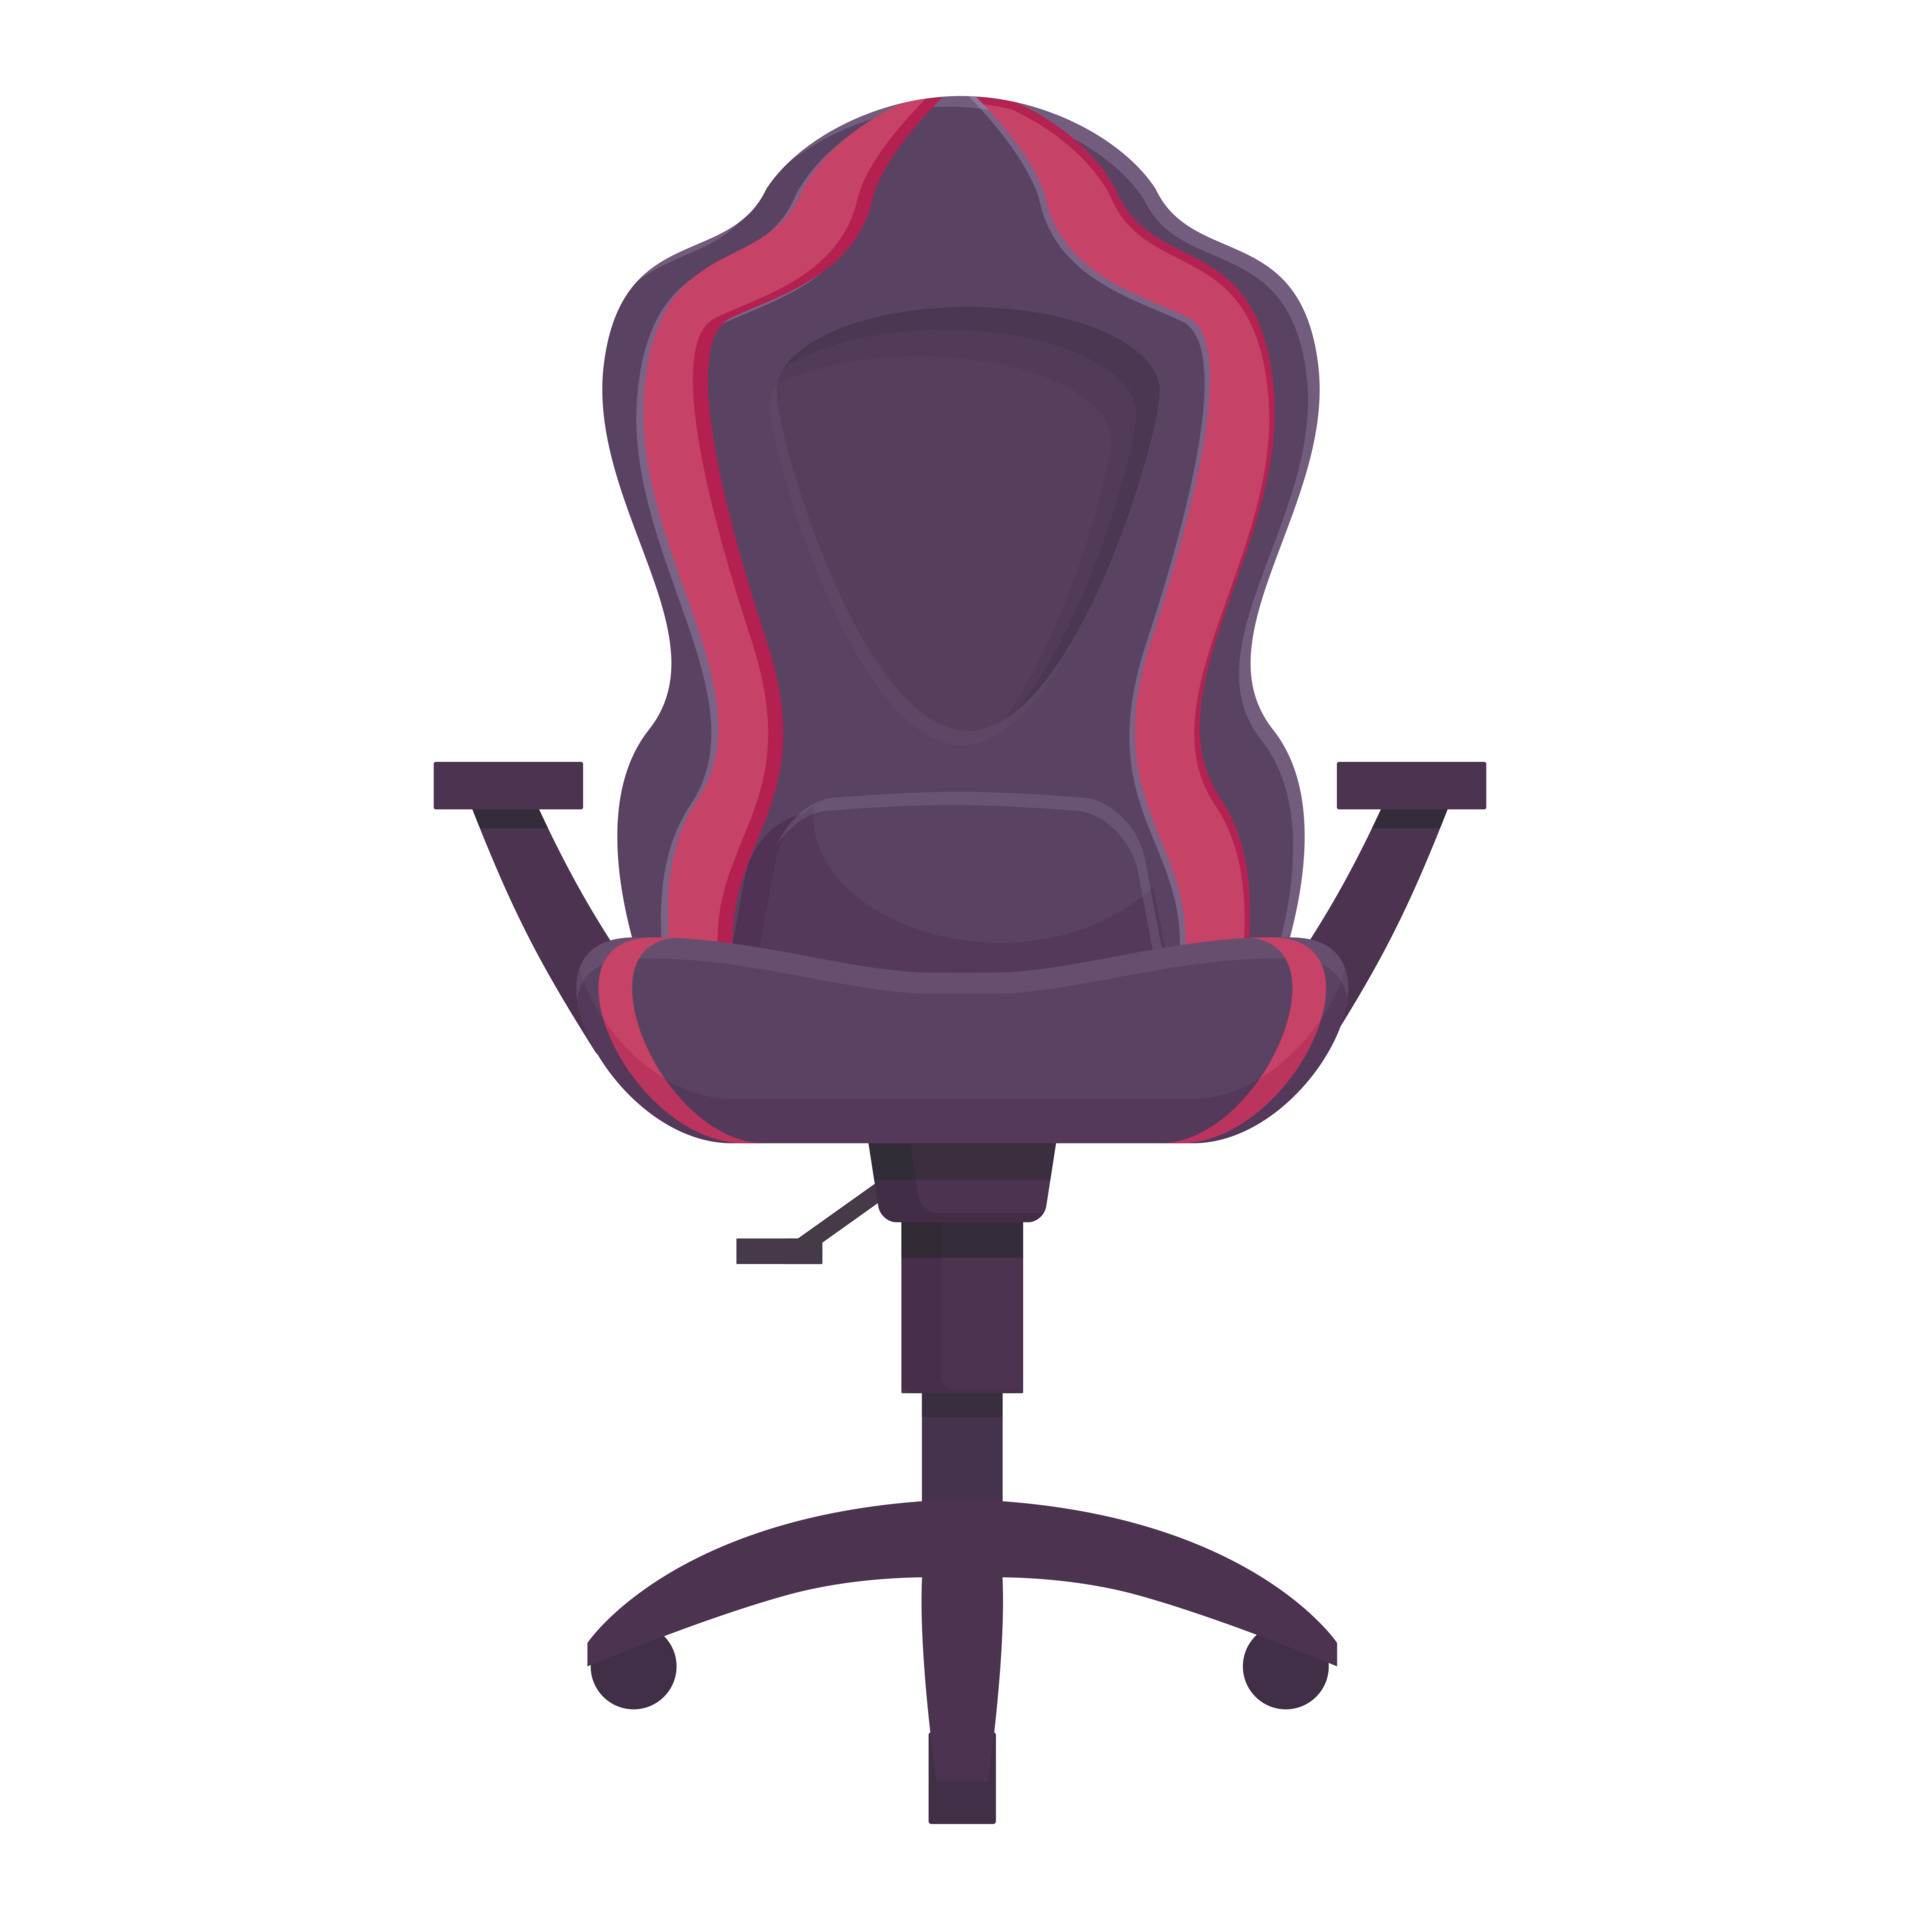 https://static.vecteezy.com/system/resources/previews/016/821/318/original/desk-gamer-chair-icon-cartoon-game-seat-vector.jpg